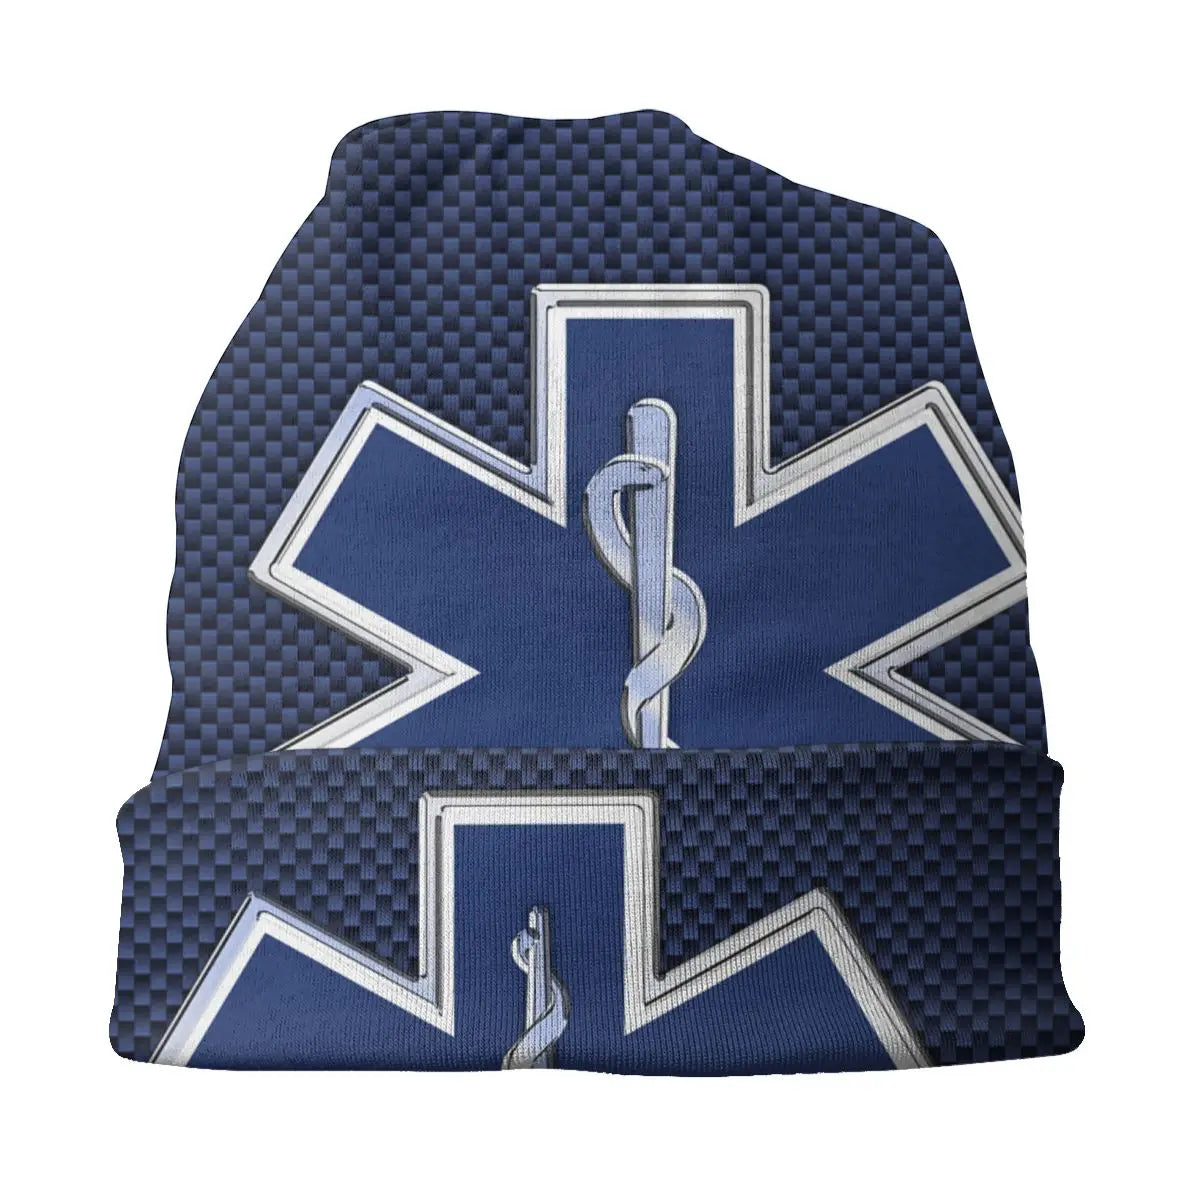 EMS/EMT/PARAMEDIC Star Of Life Beanie Knitted Hat Medic Beanies